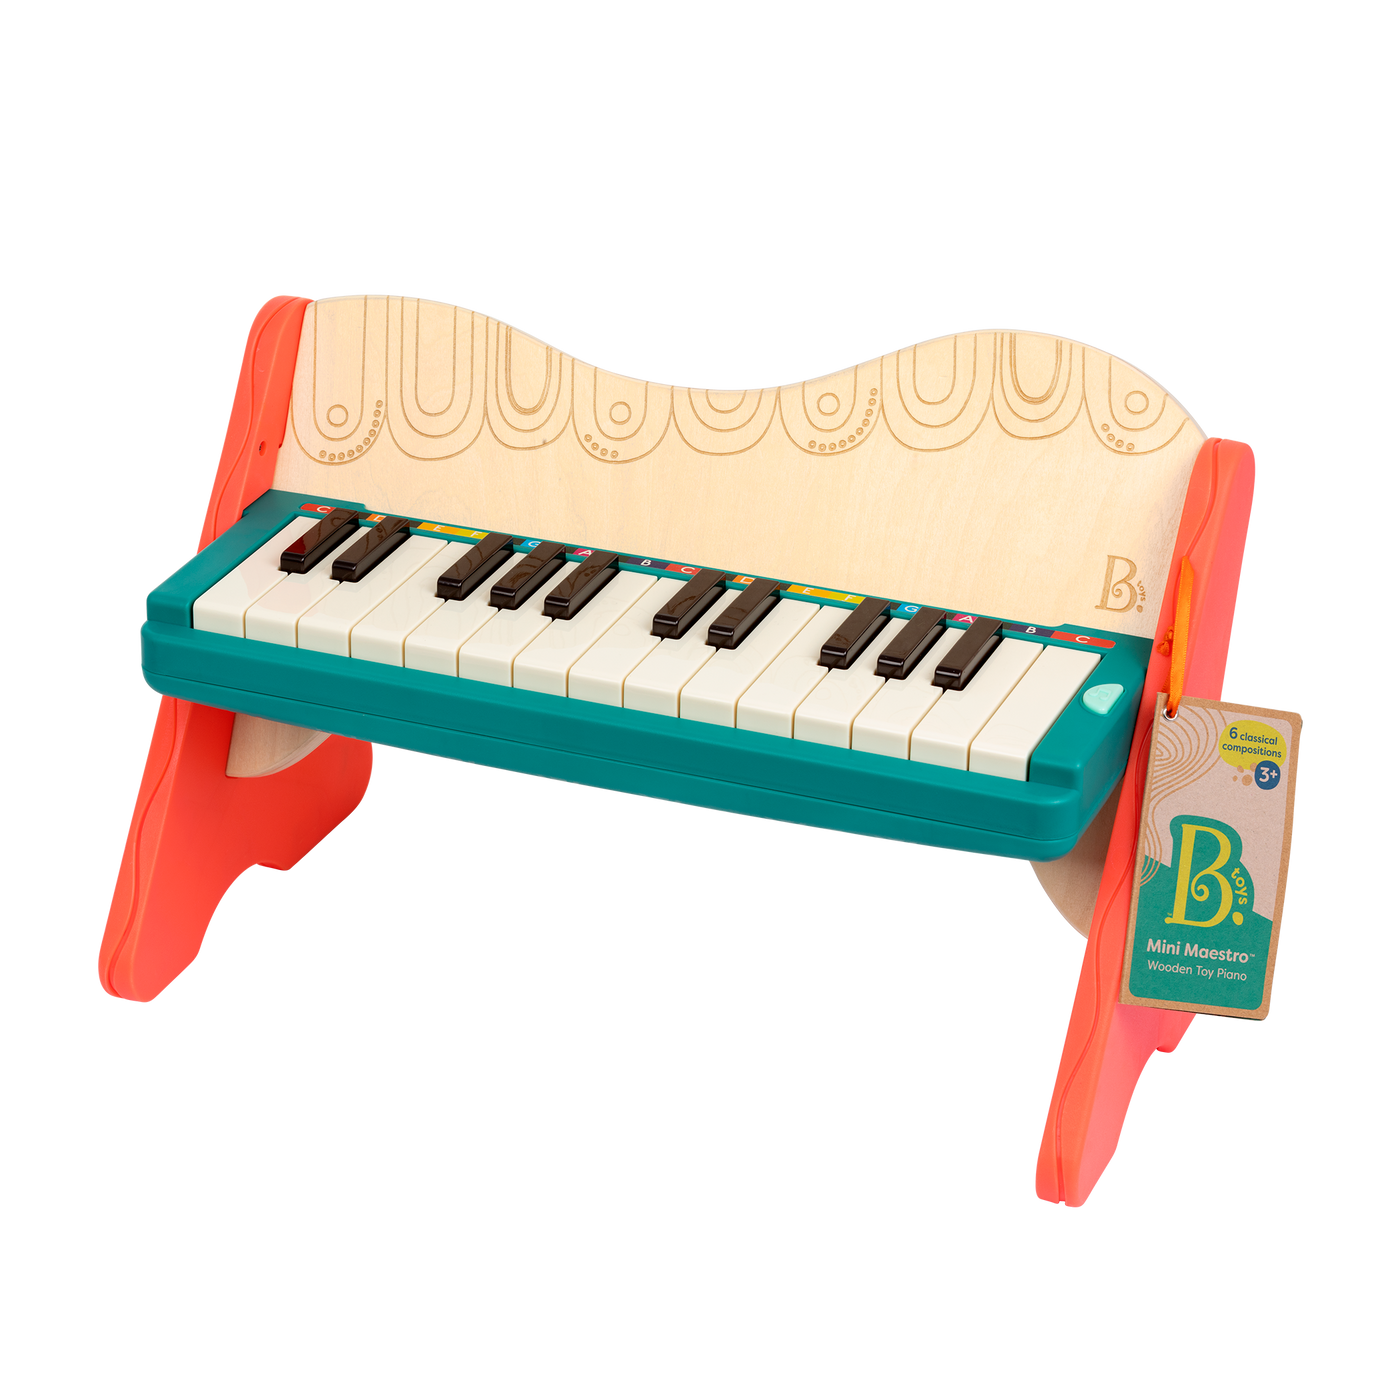 Wooden toy piano with songbook.